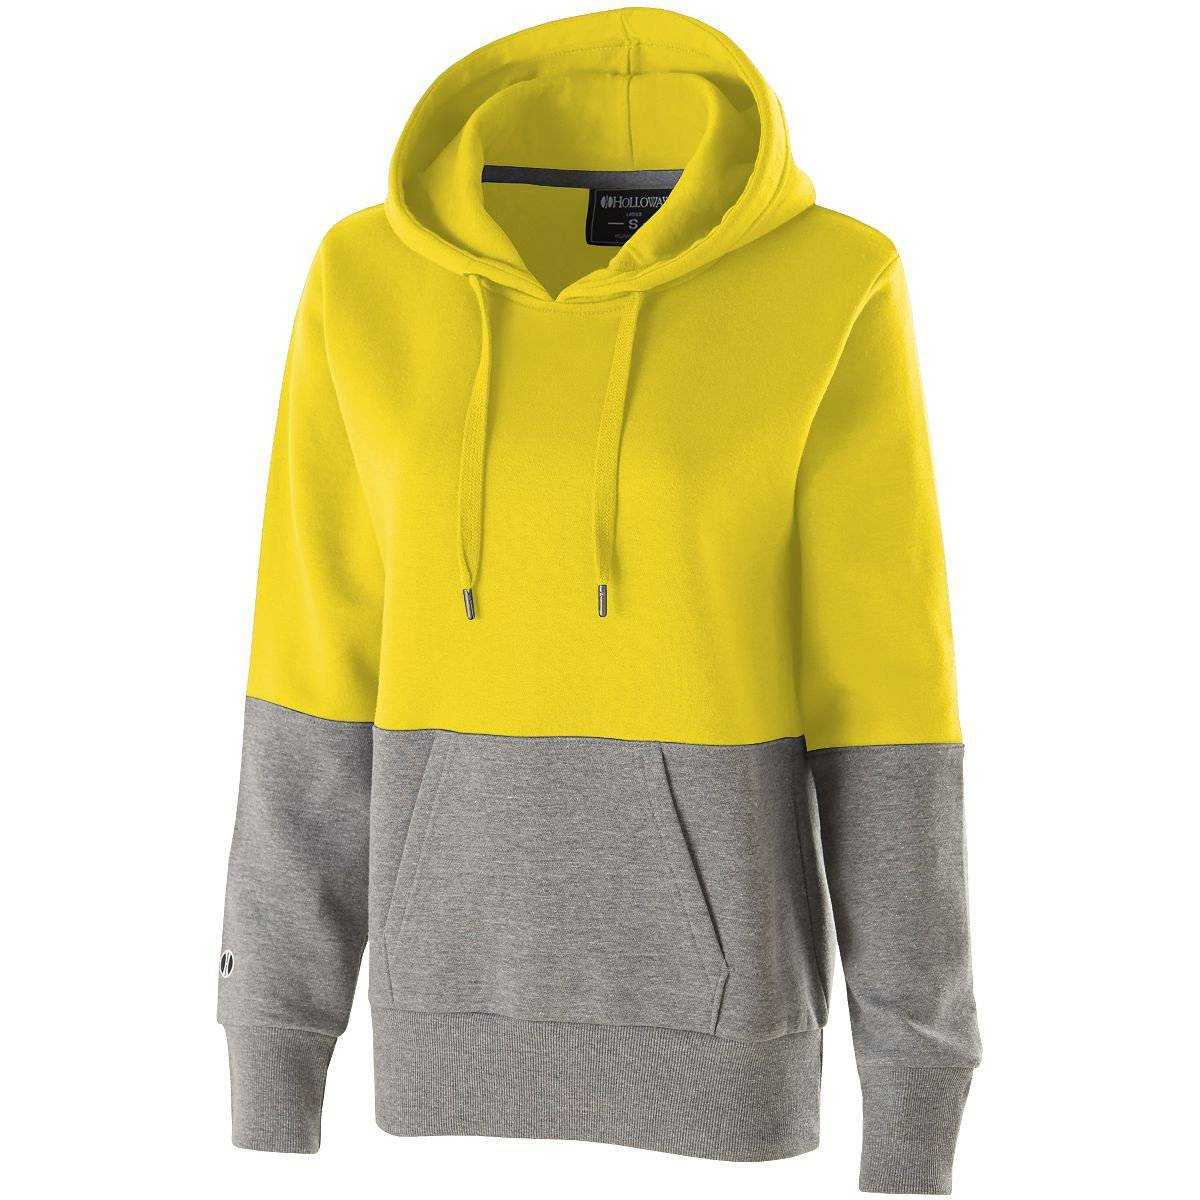 Holloway 229378 Ladies Ration Hoodie - Bright Yellow Charcoal Heather